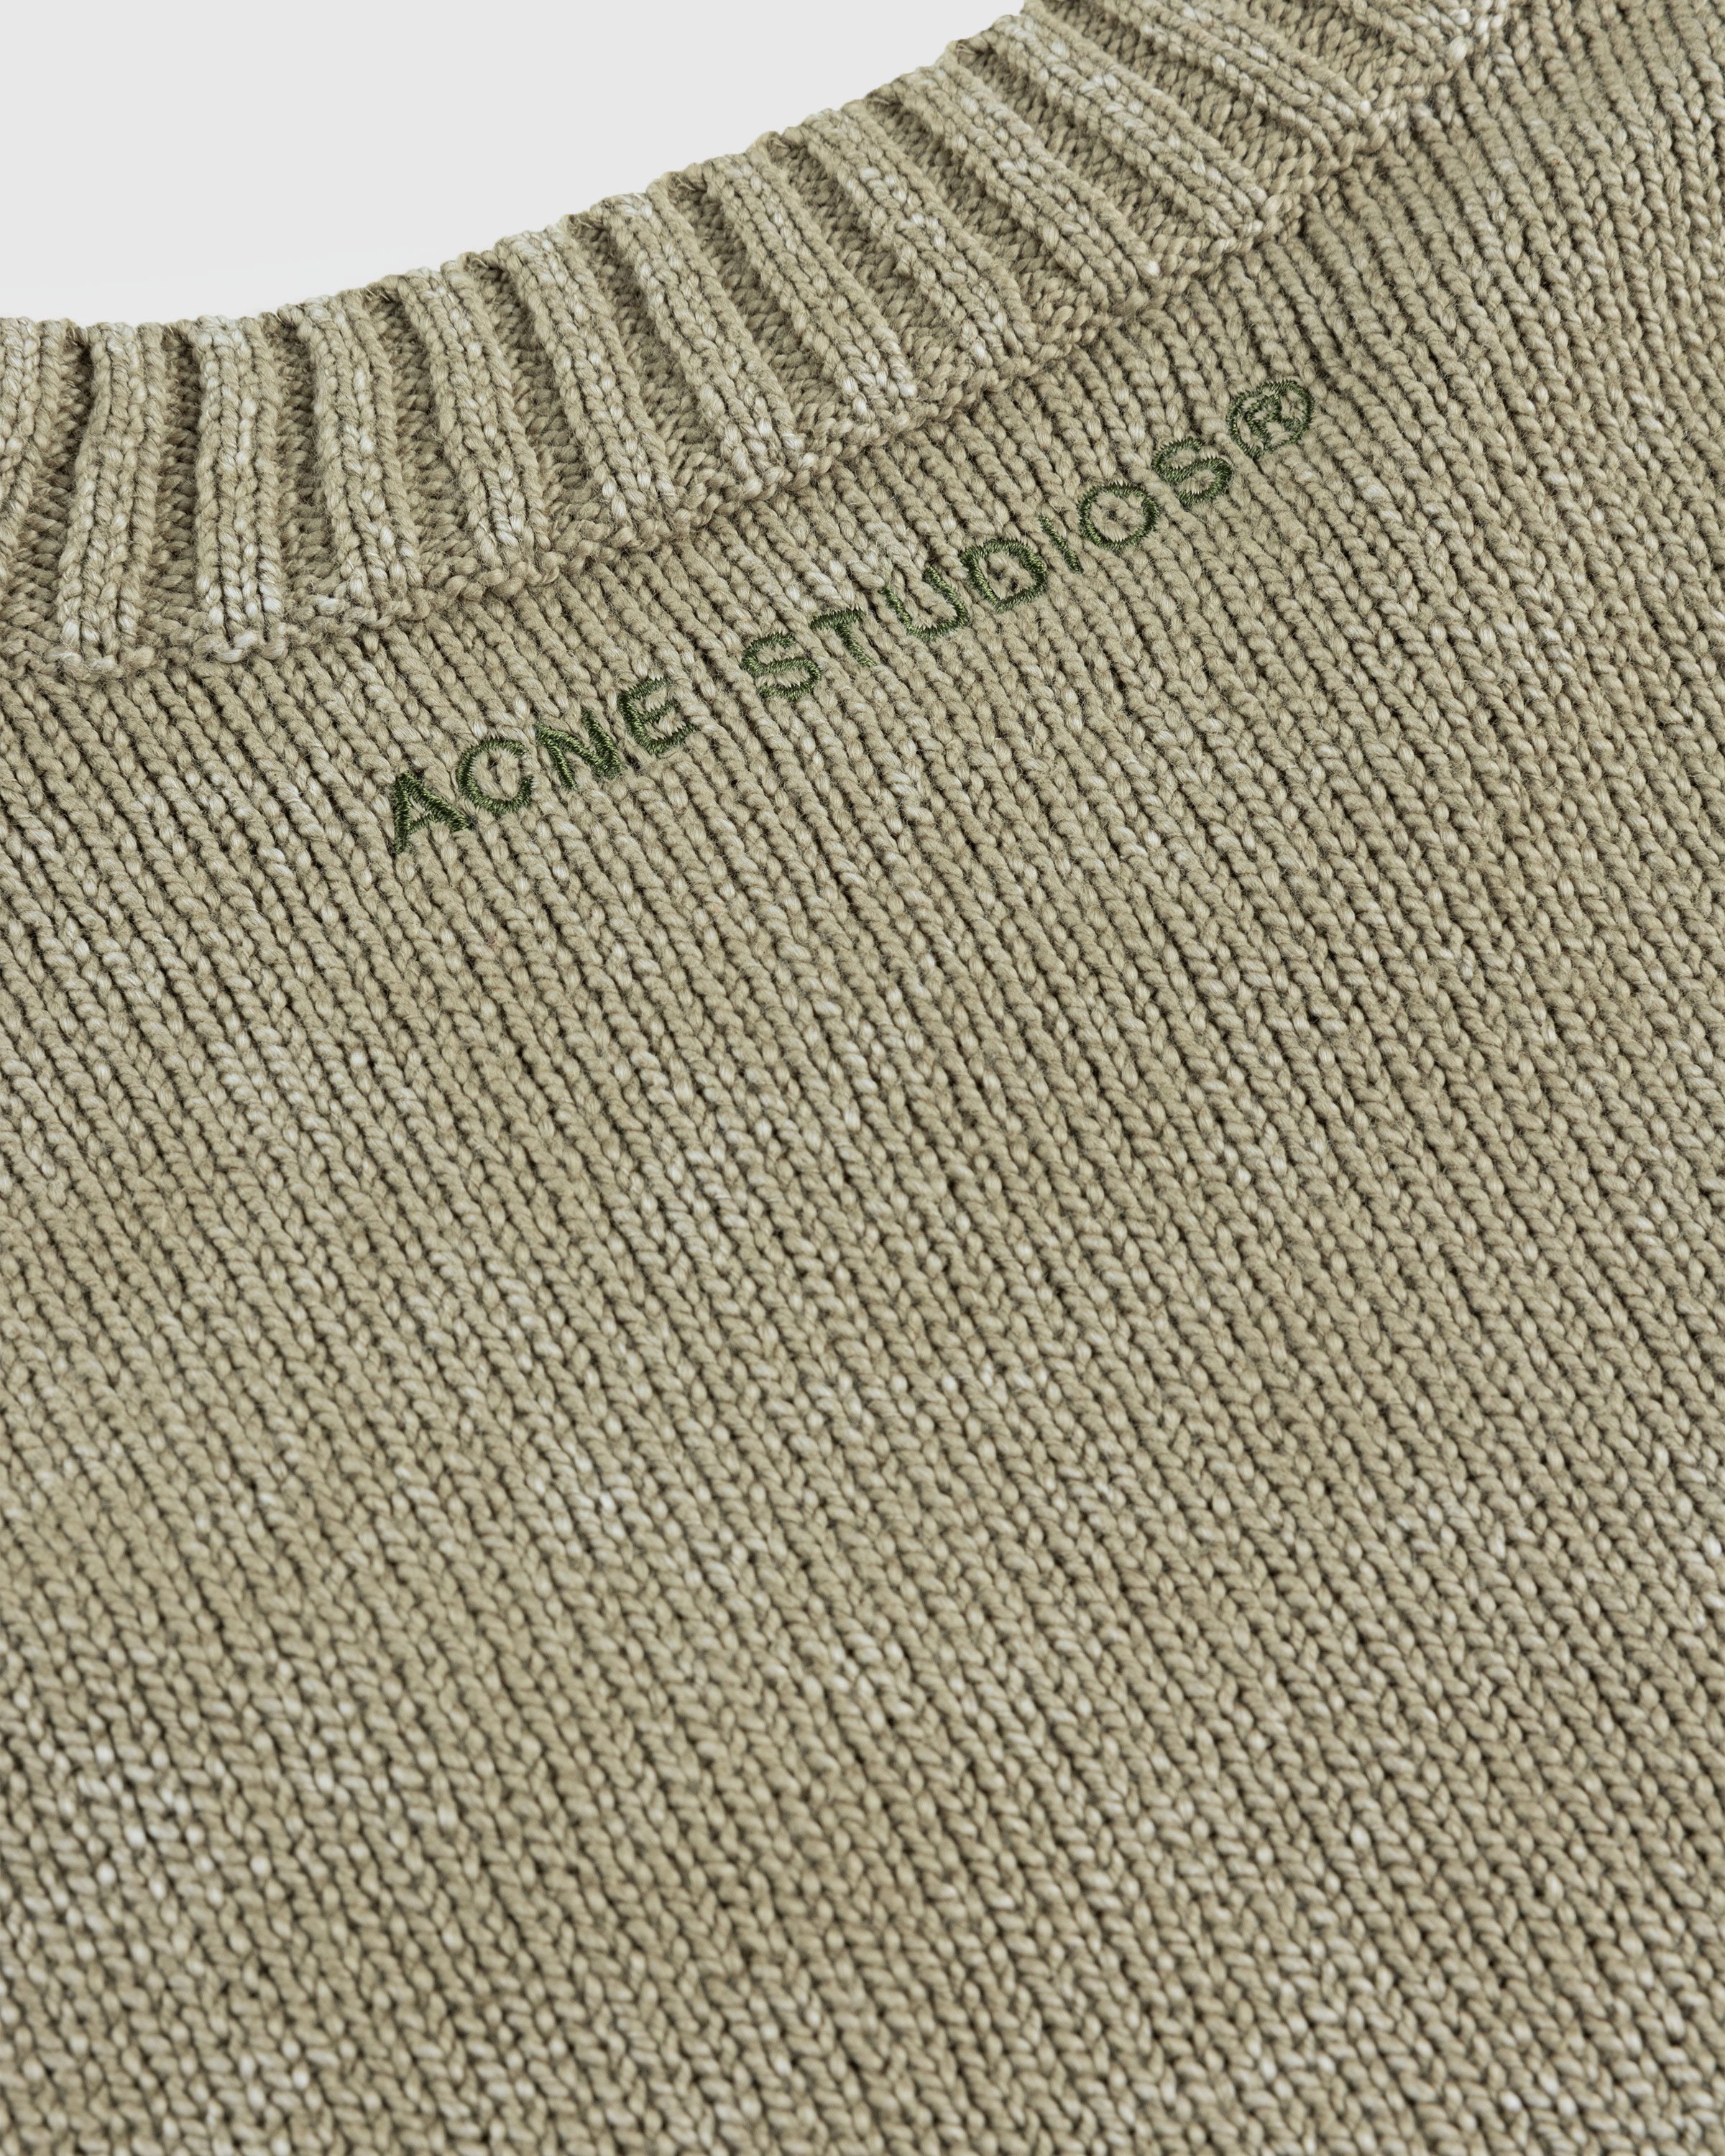 Acne Studios - FN-MN-KNIT000443 Olive Green - Clothing - Green - Image 7